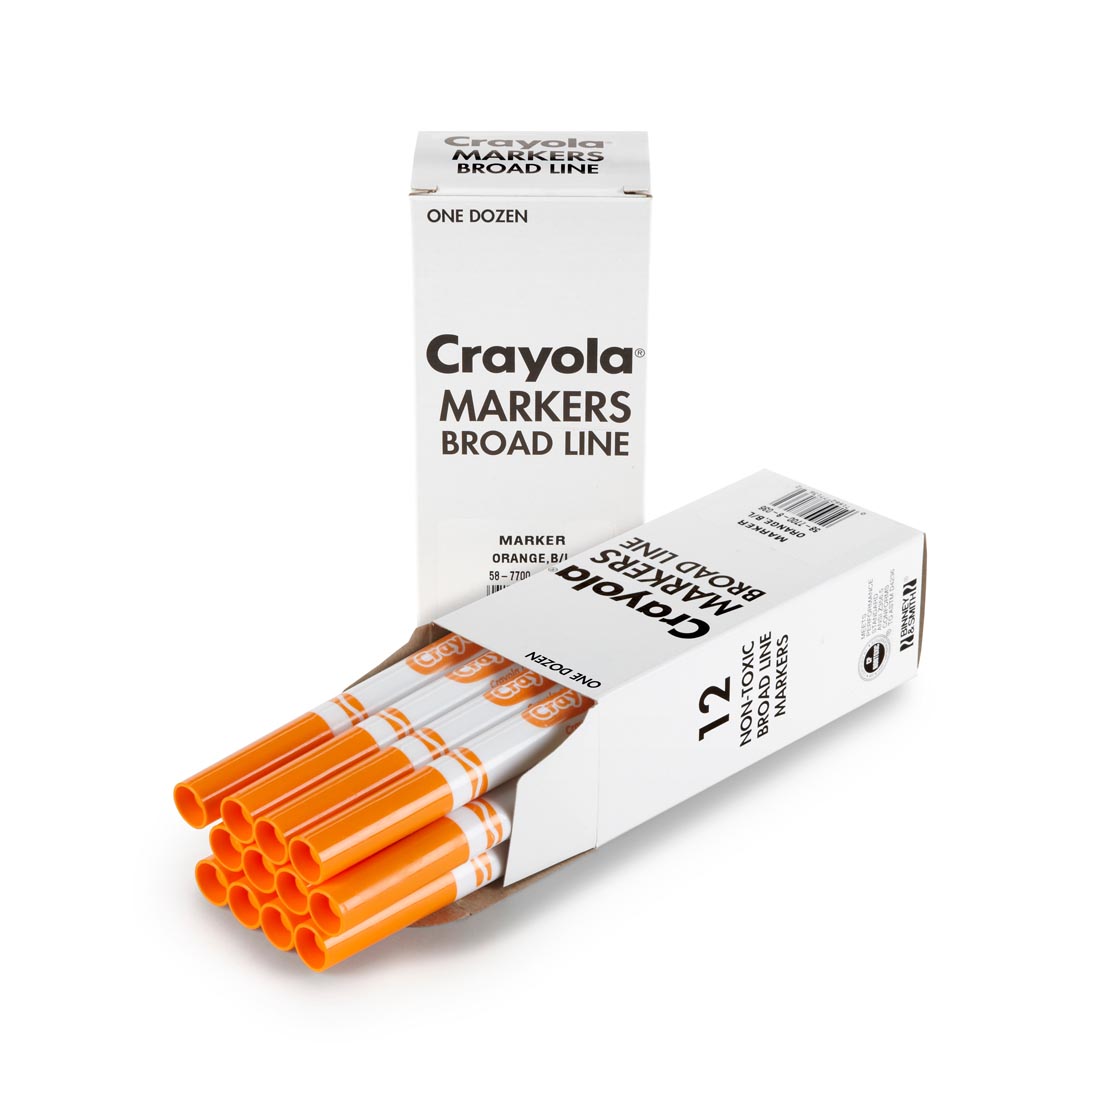 Box of Crayola Broad Line Marker Refills shown both closed and open with 12 Orange Markers